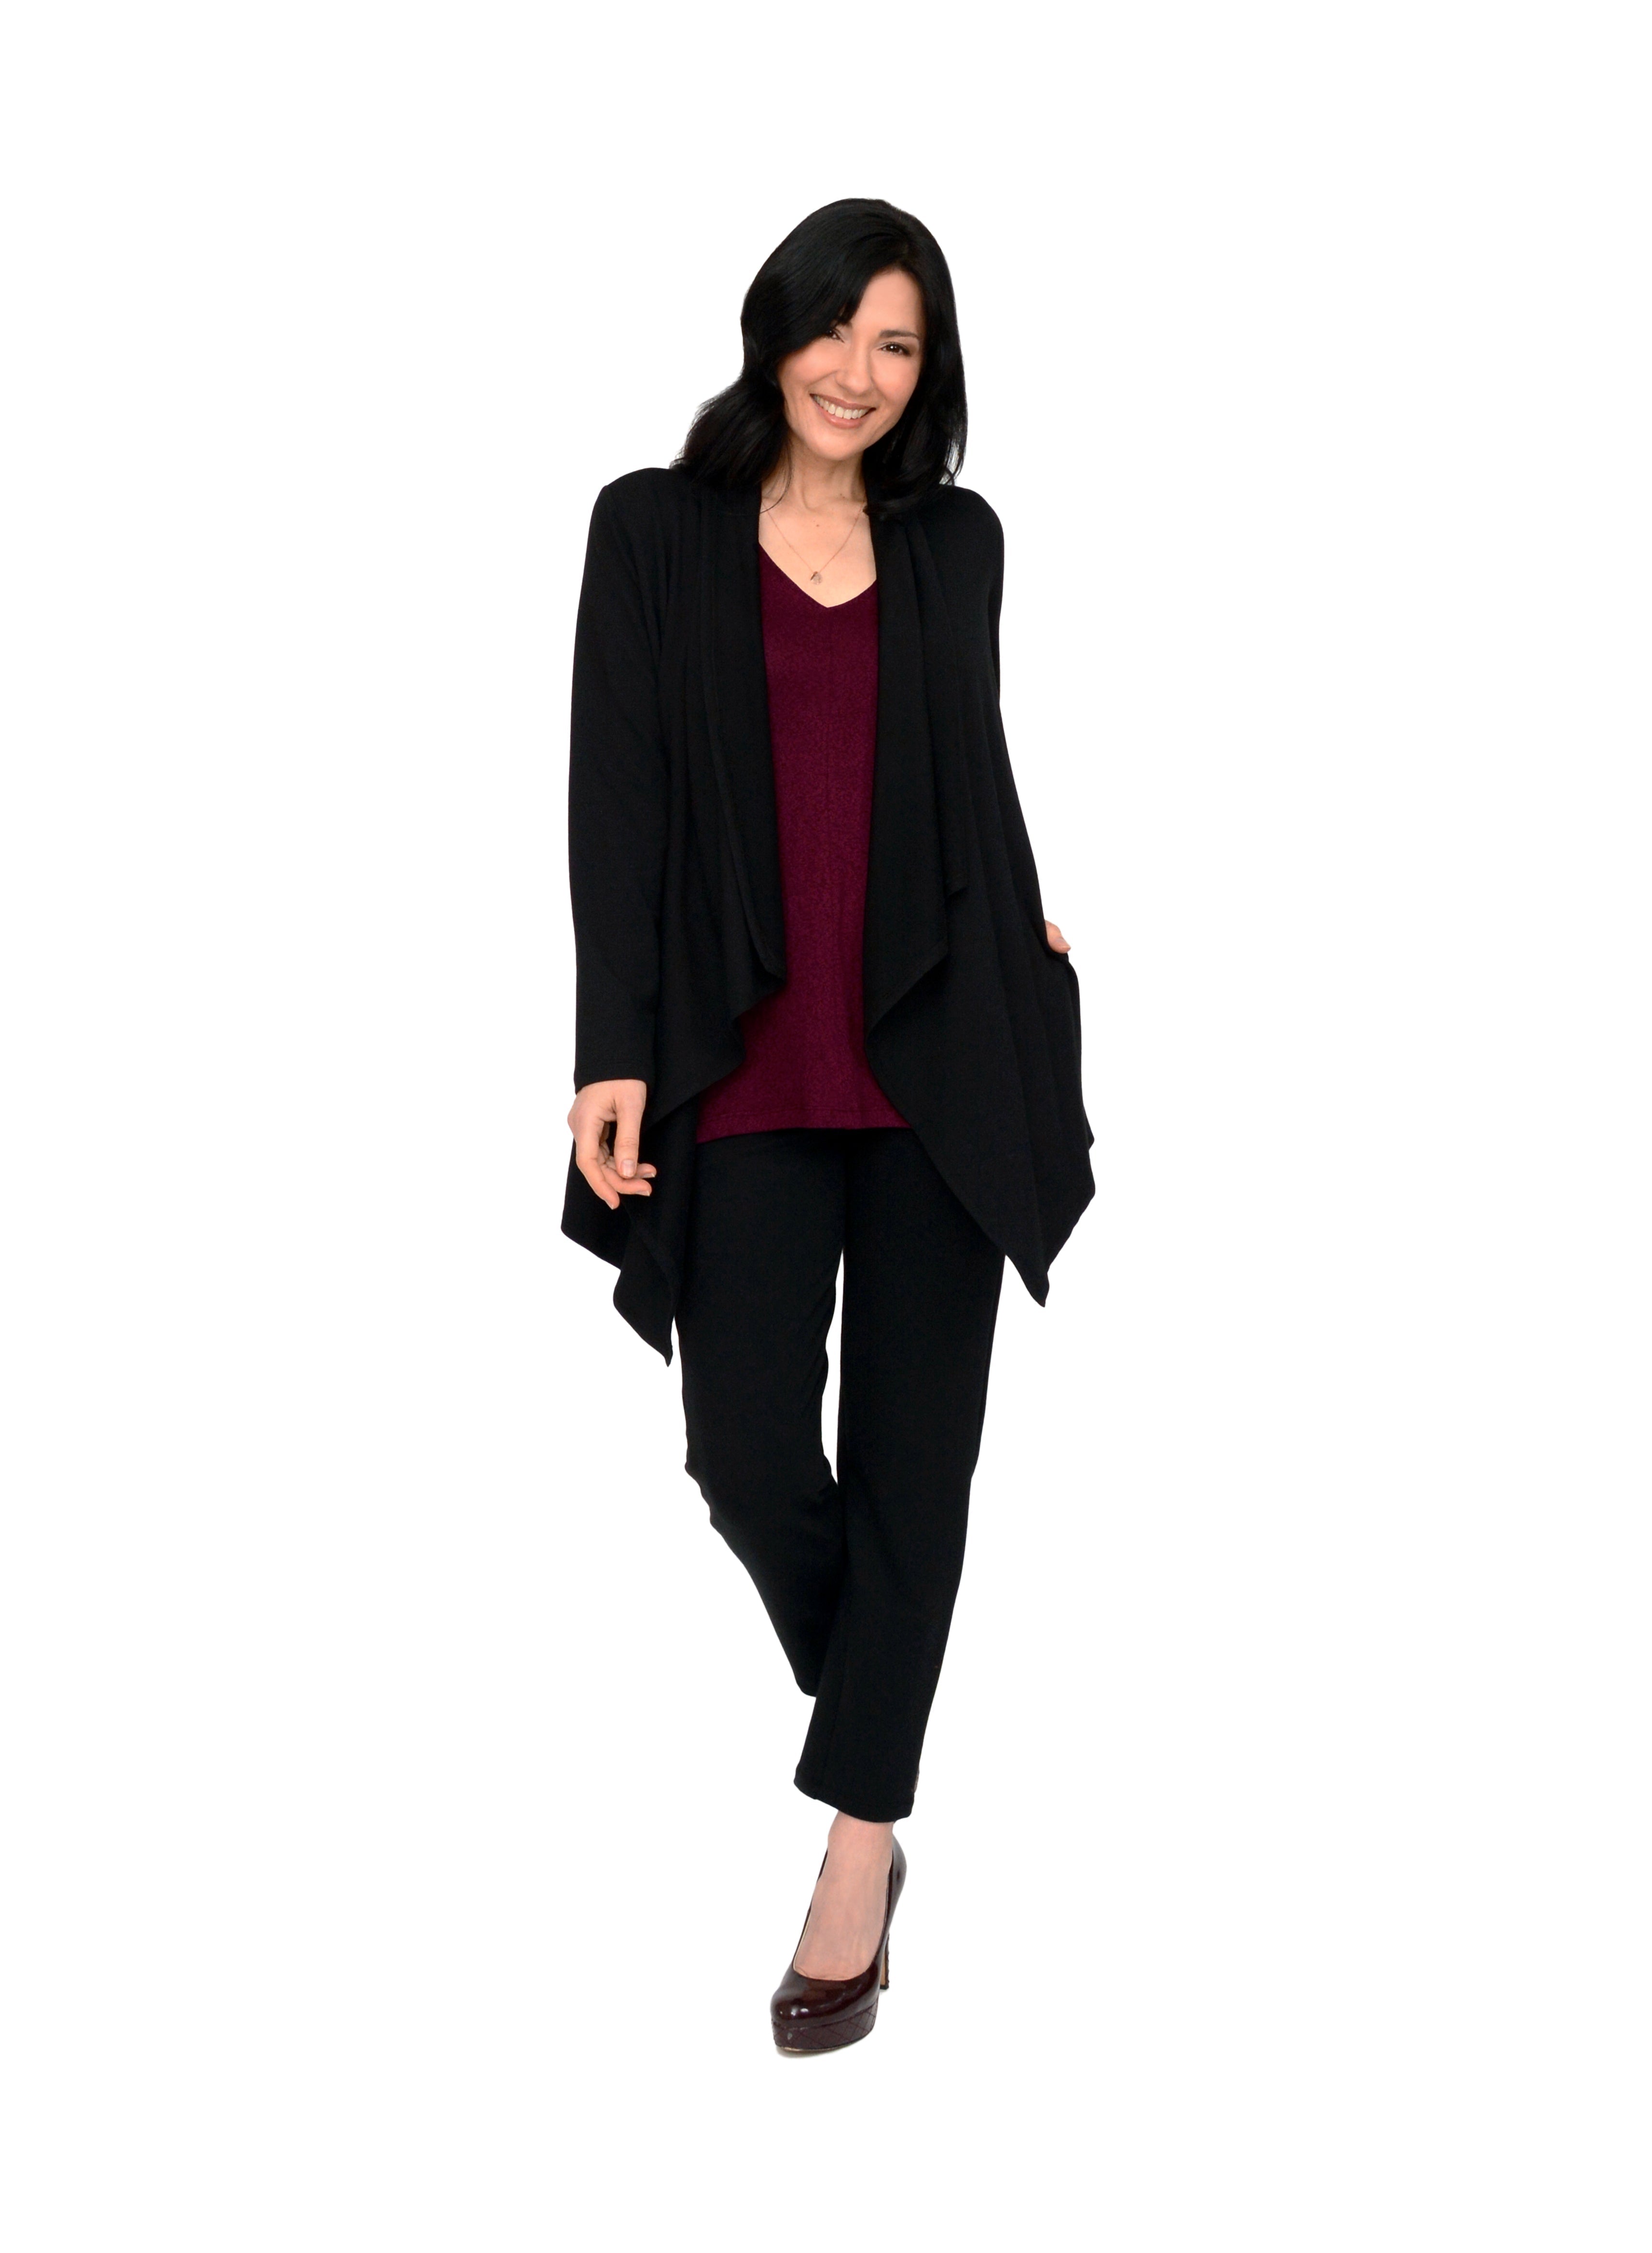 Black open style cardigan with long drape in front and side seam pockets. Styled with black pants